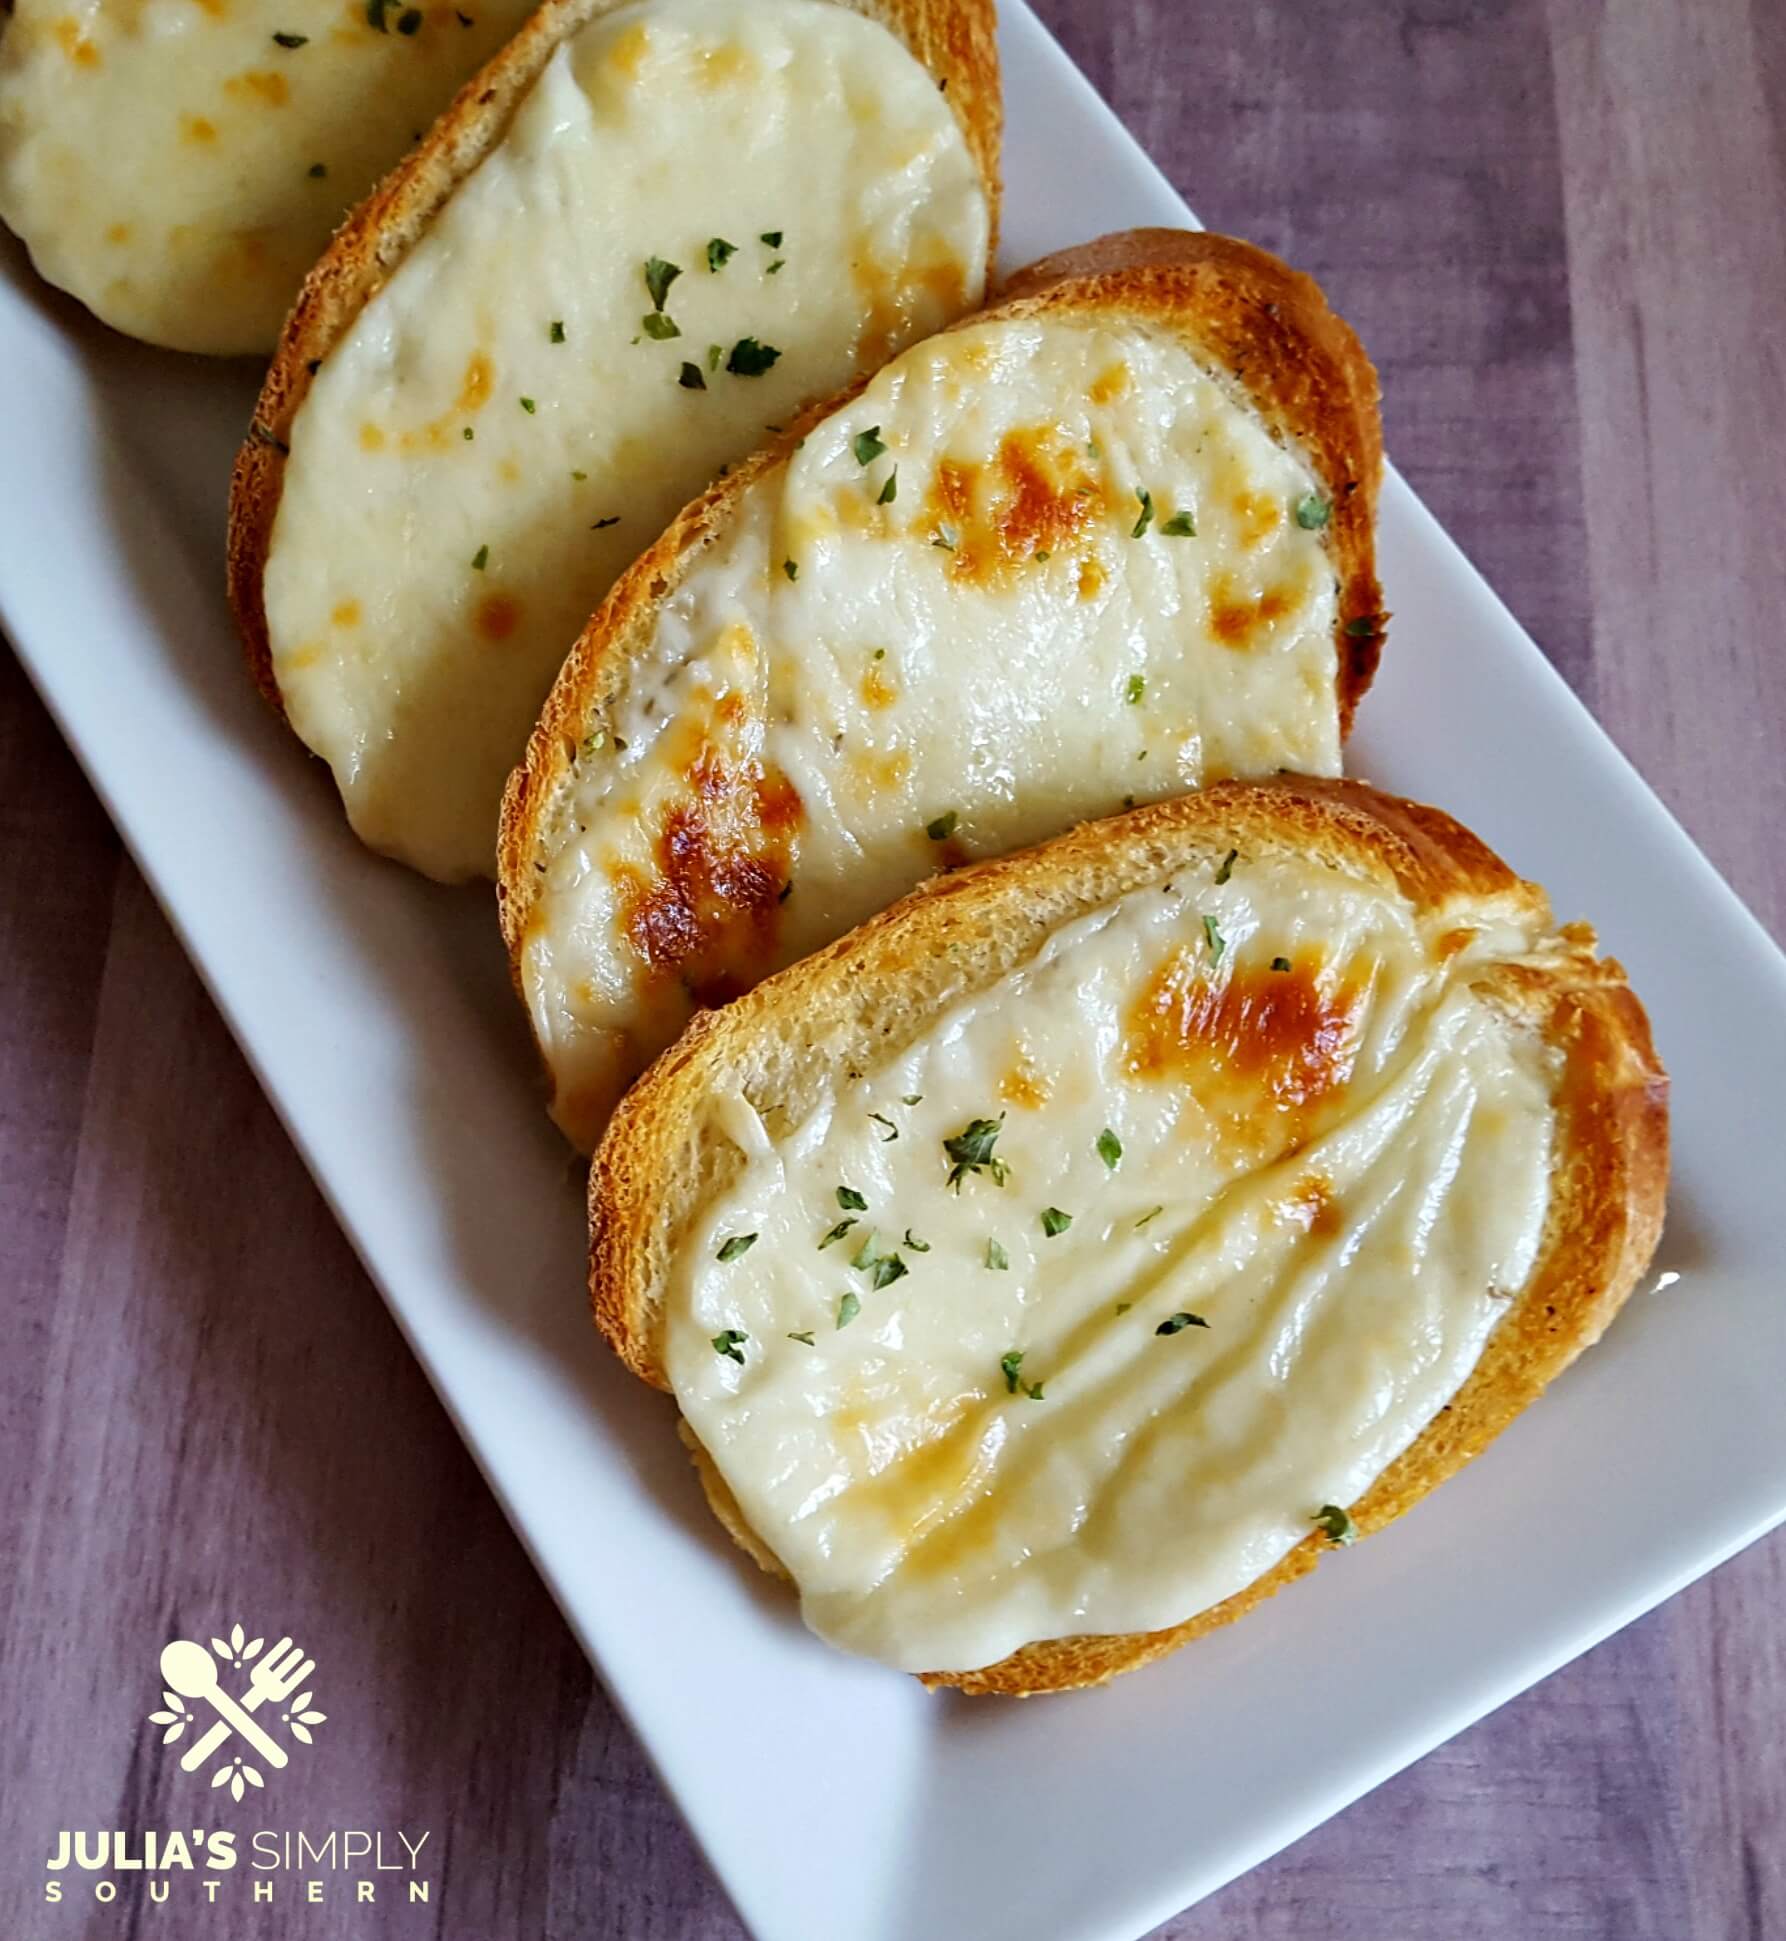 Platter with cheesy garlic bread - homemade and delicious